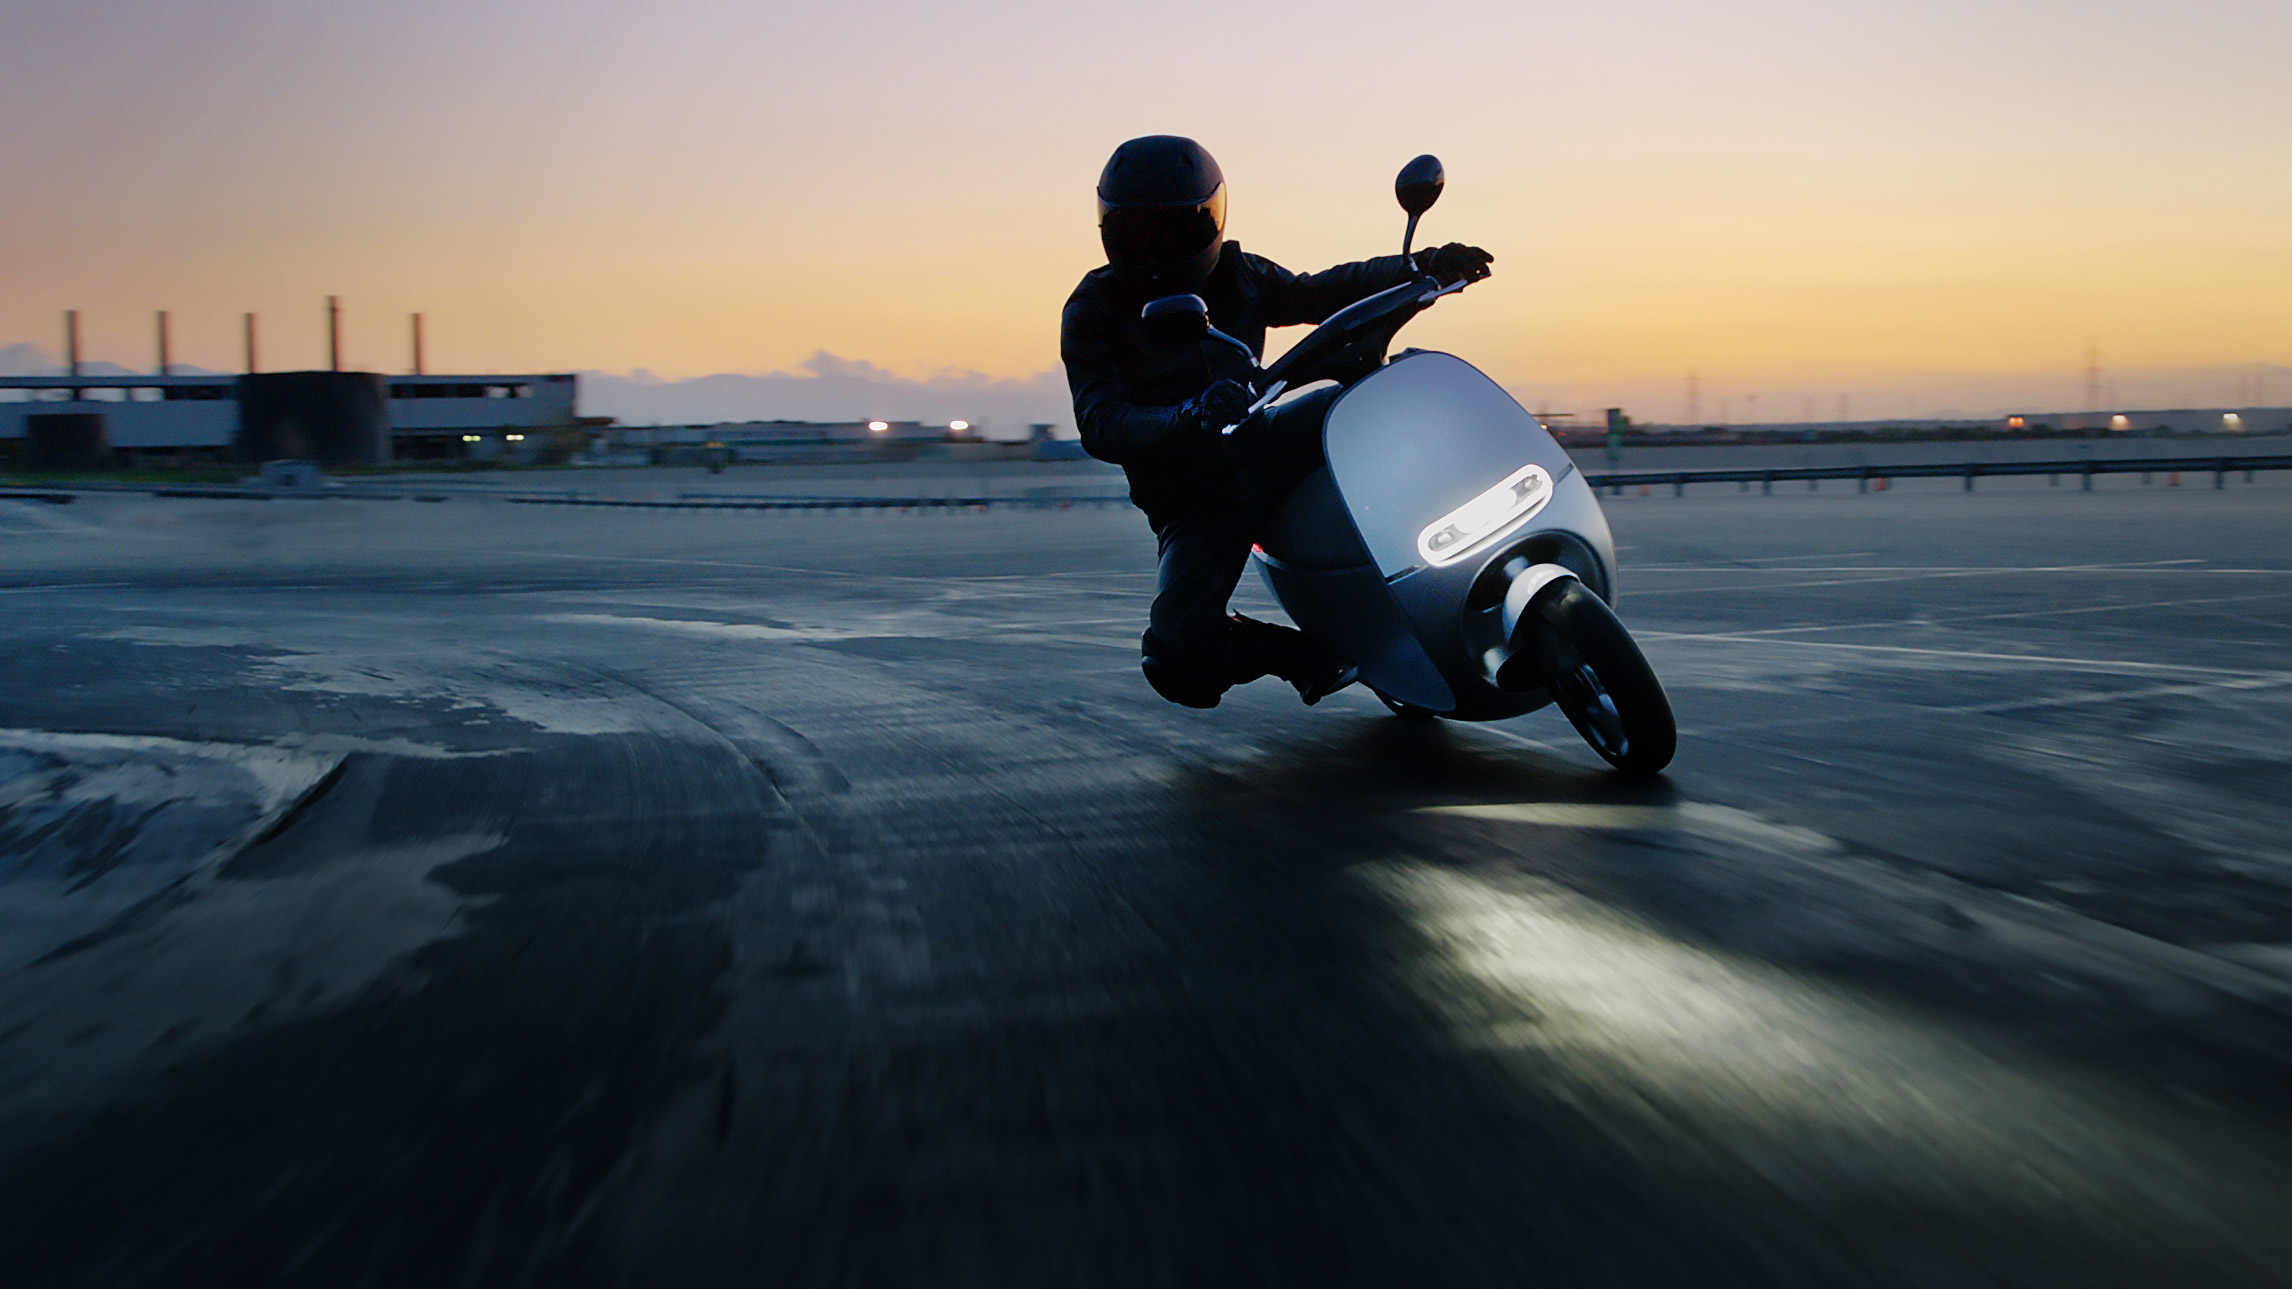 a helmeted Gogoro rider leans to make a turn at sunset